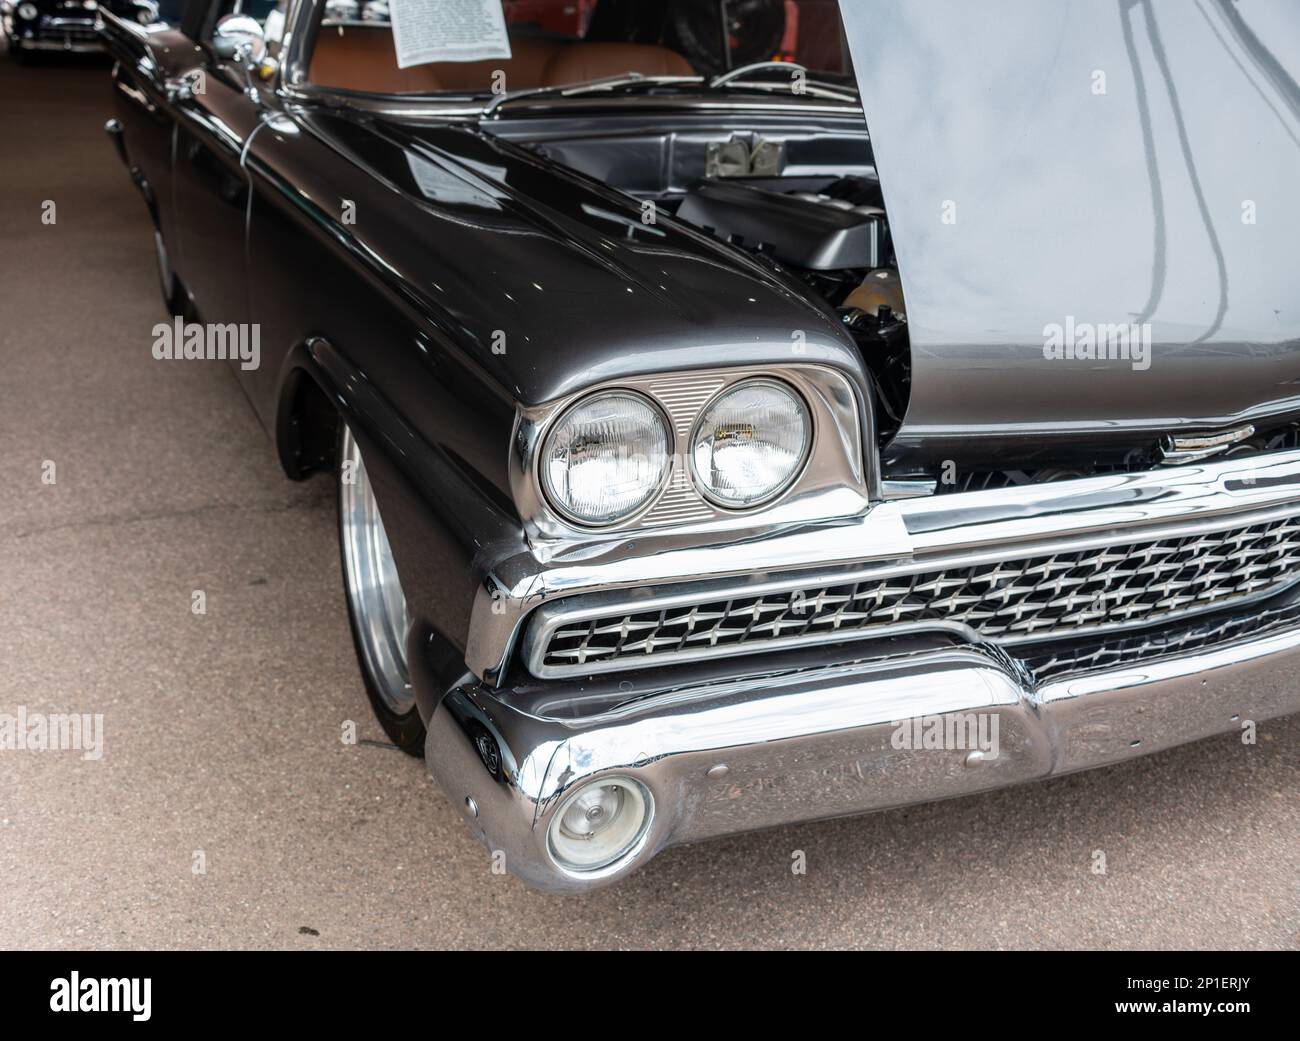 1959 Ford Galaxie Sunliner Cabriolet Foto Stock